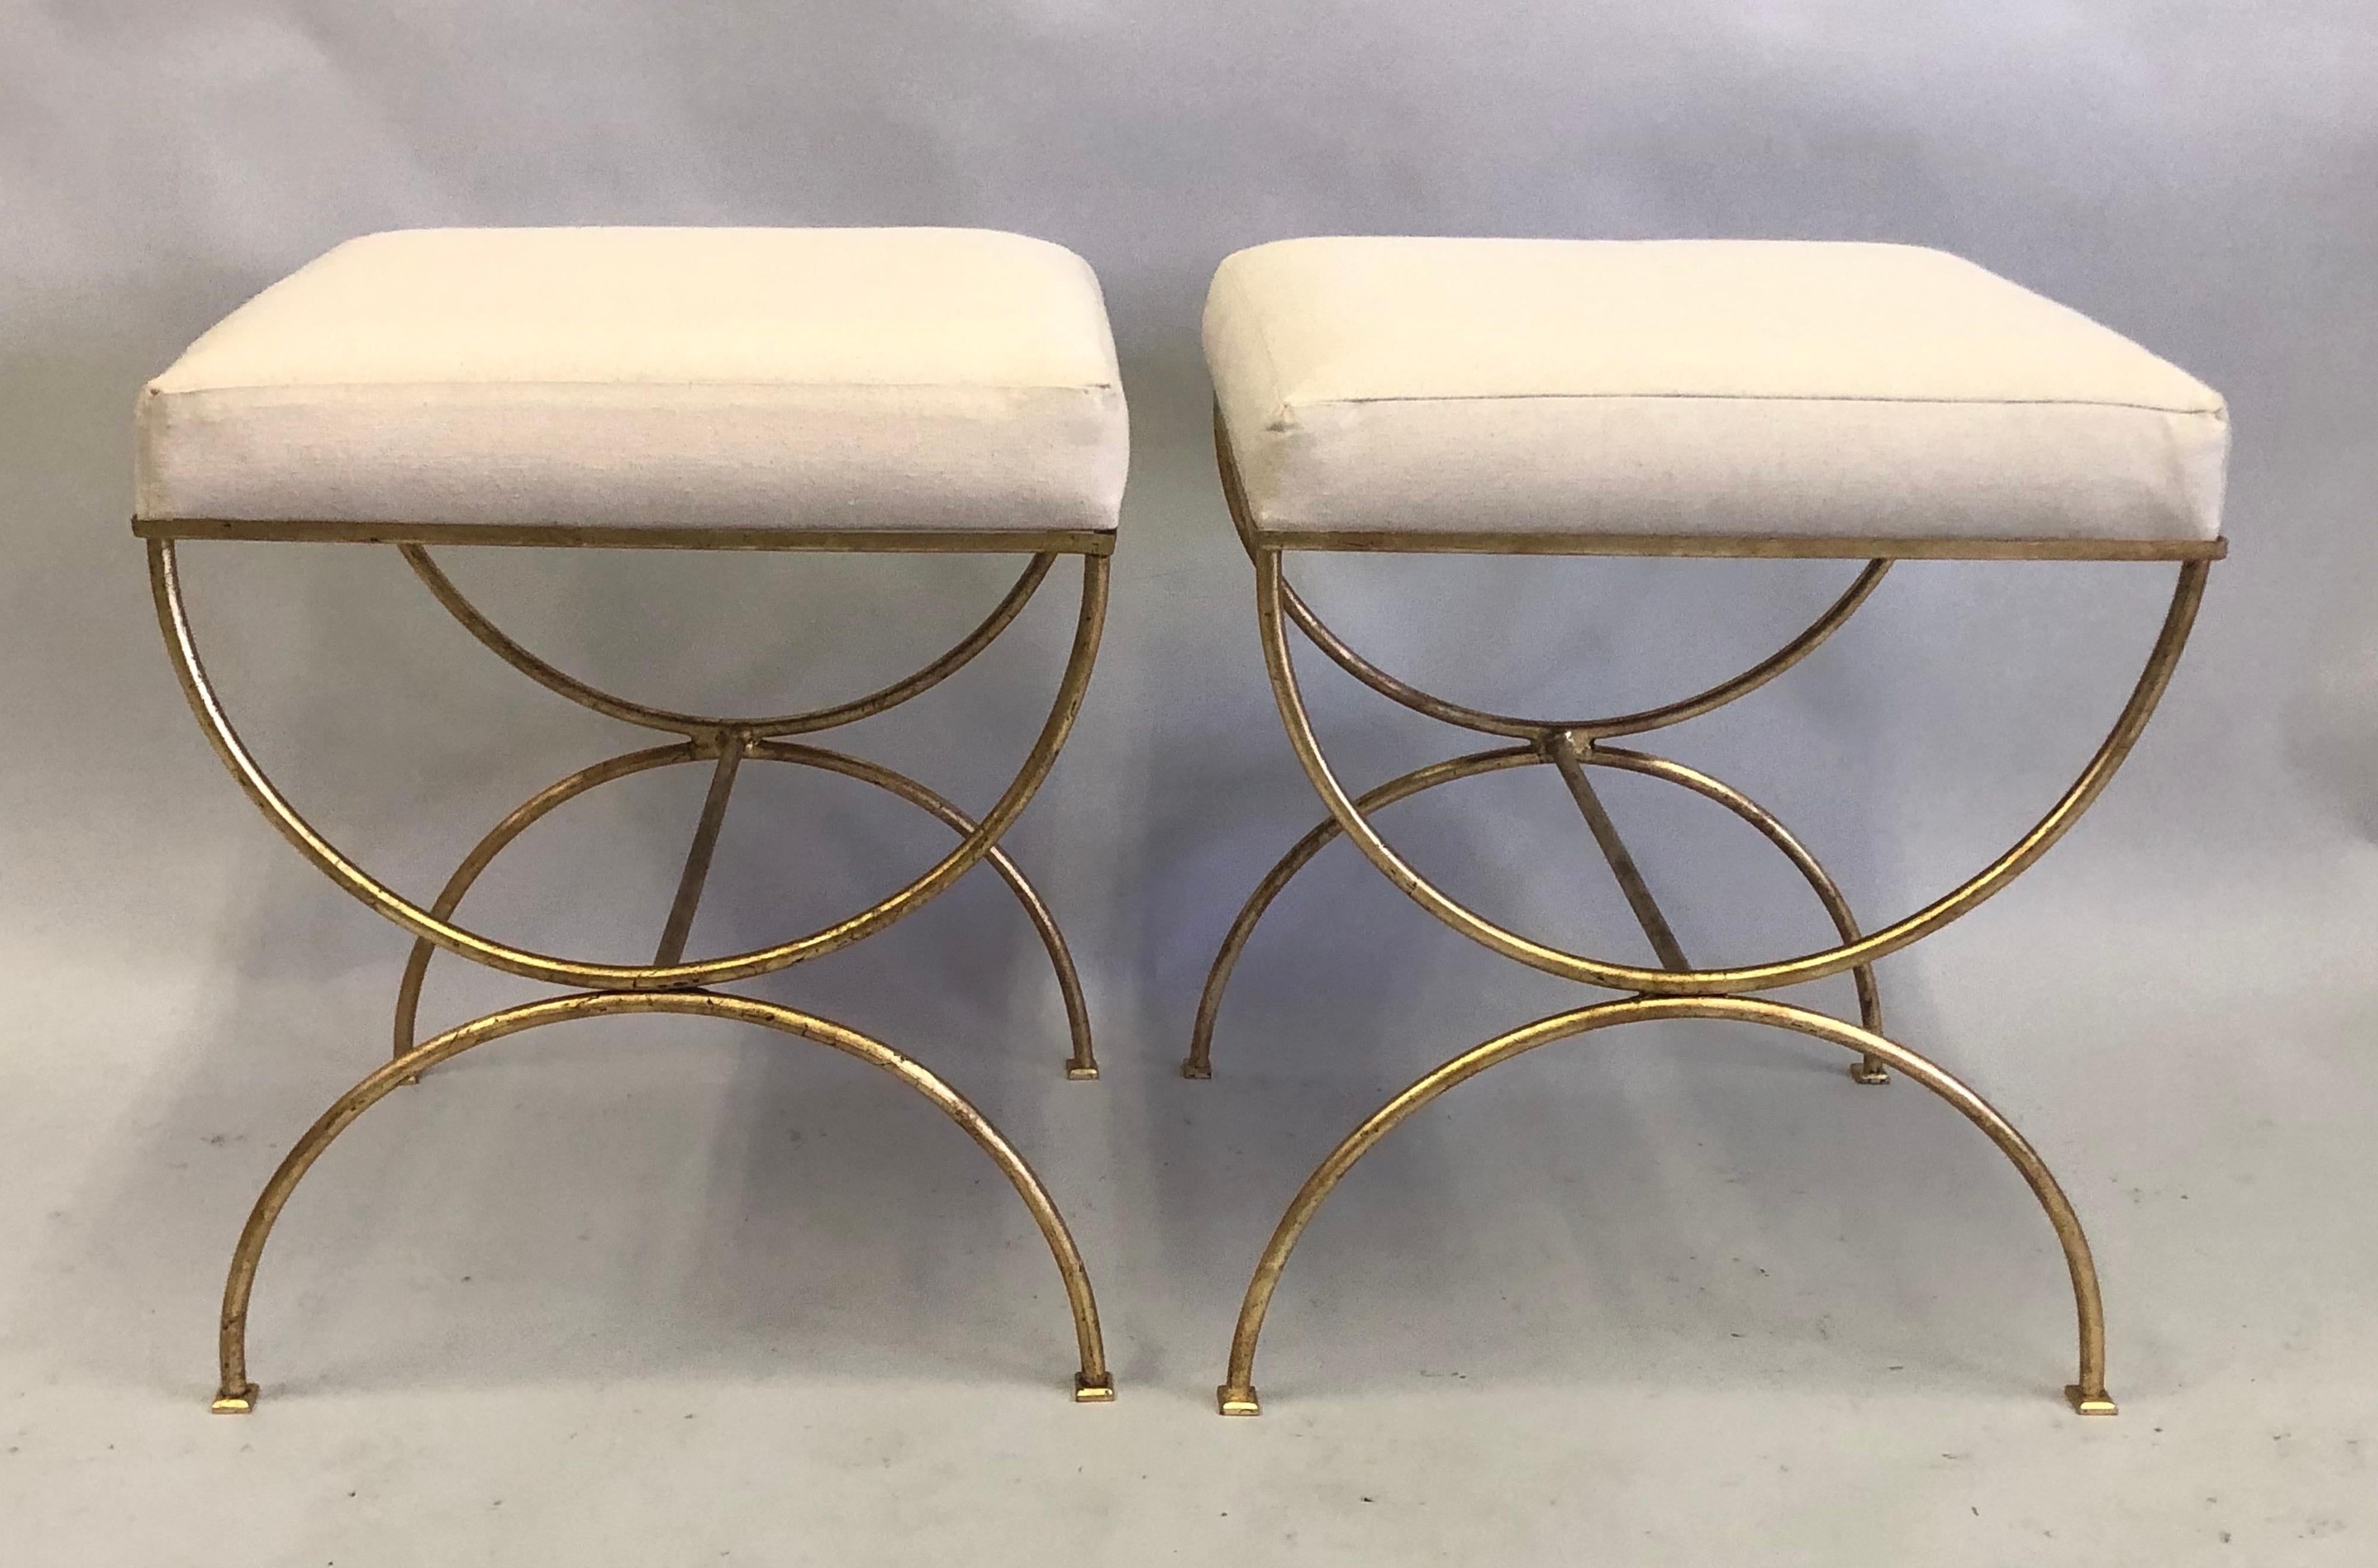 Pair French Modern Neoclassical Gilt Iron Benches, Style of Jean-Michel Frank In Good Condition For Sale In New York, NY